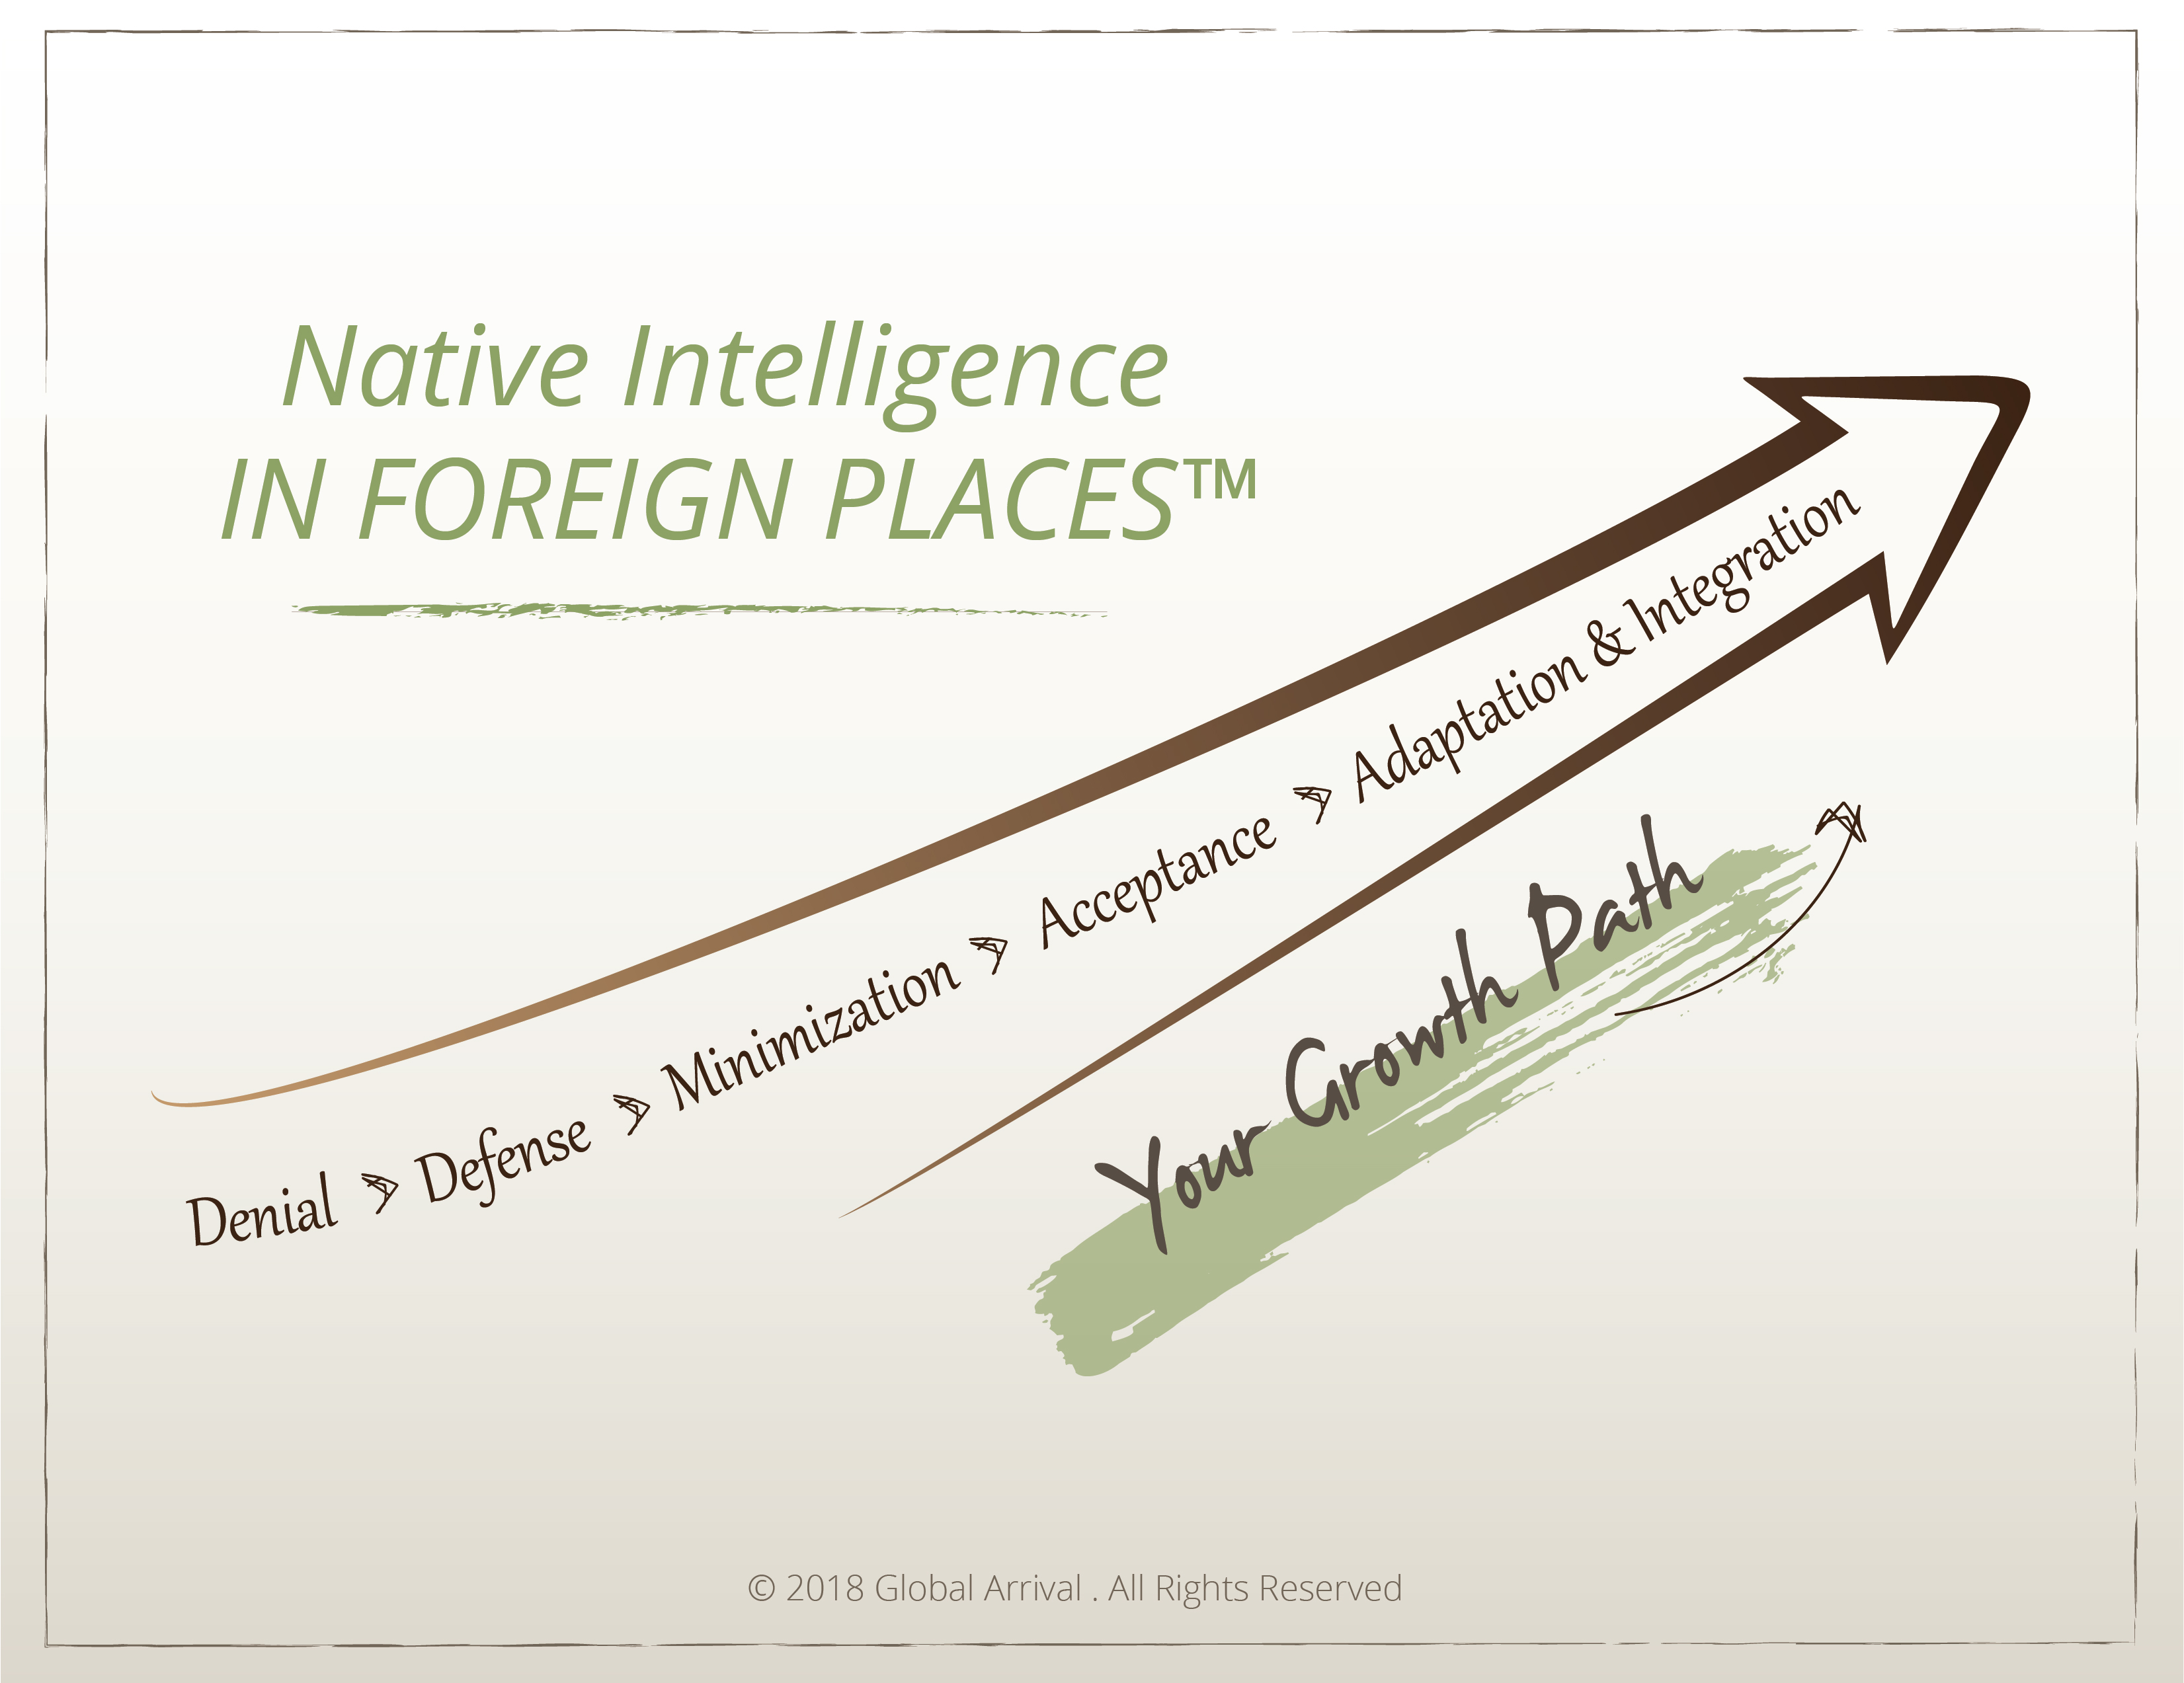 Native Intelligence in Foreign Places